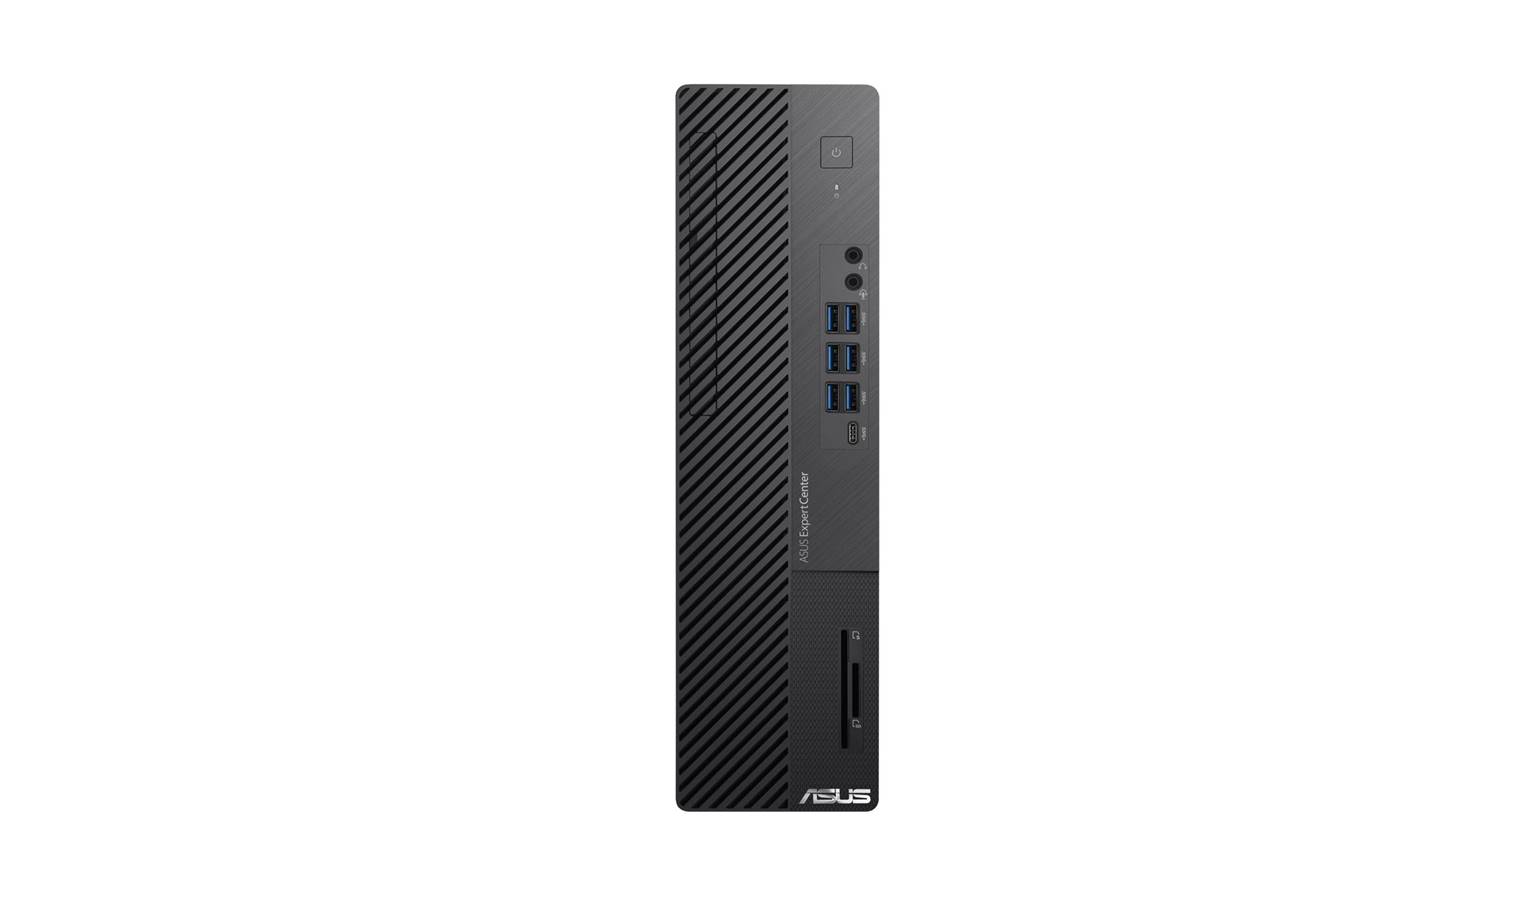 ASUS ExpertCenter D7 SFF (Core i5, NVIDIA GeForce GT1030, 8GB